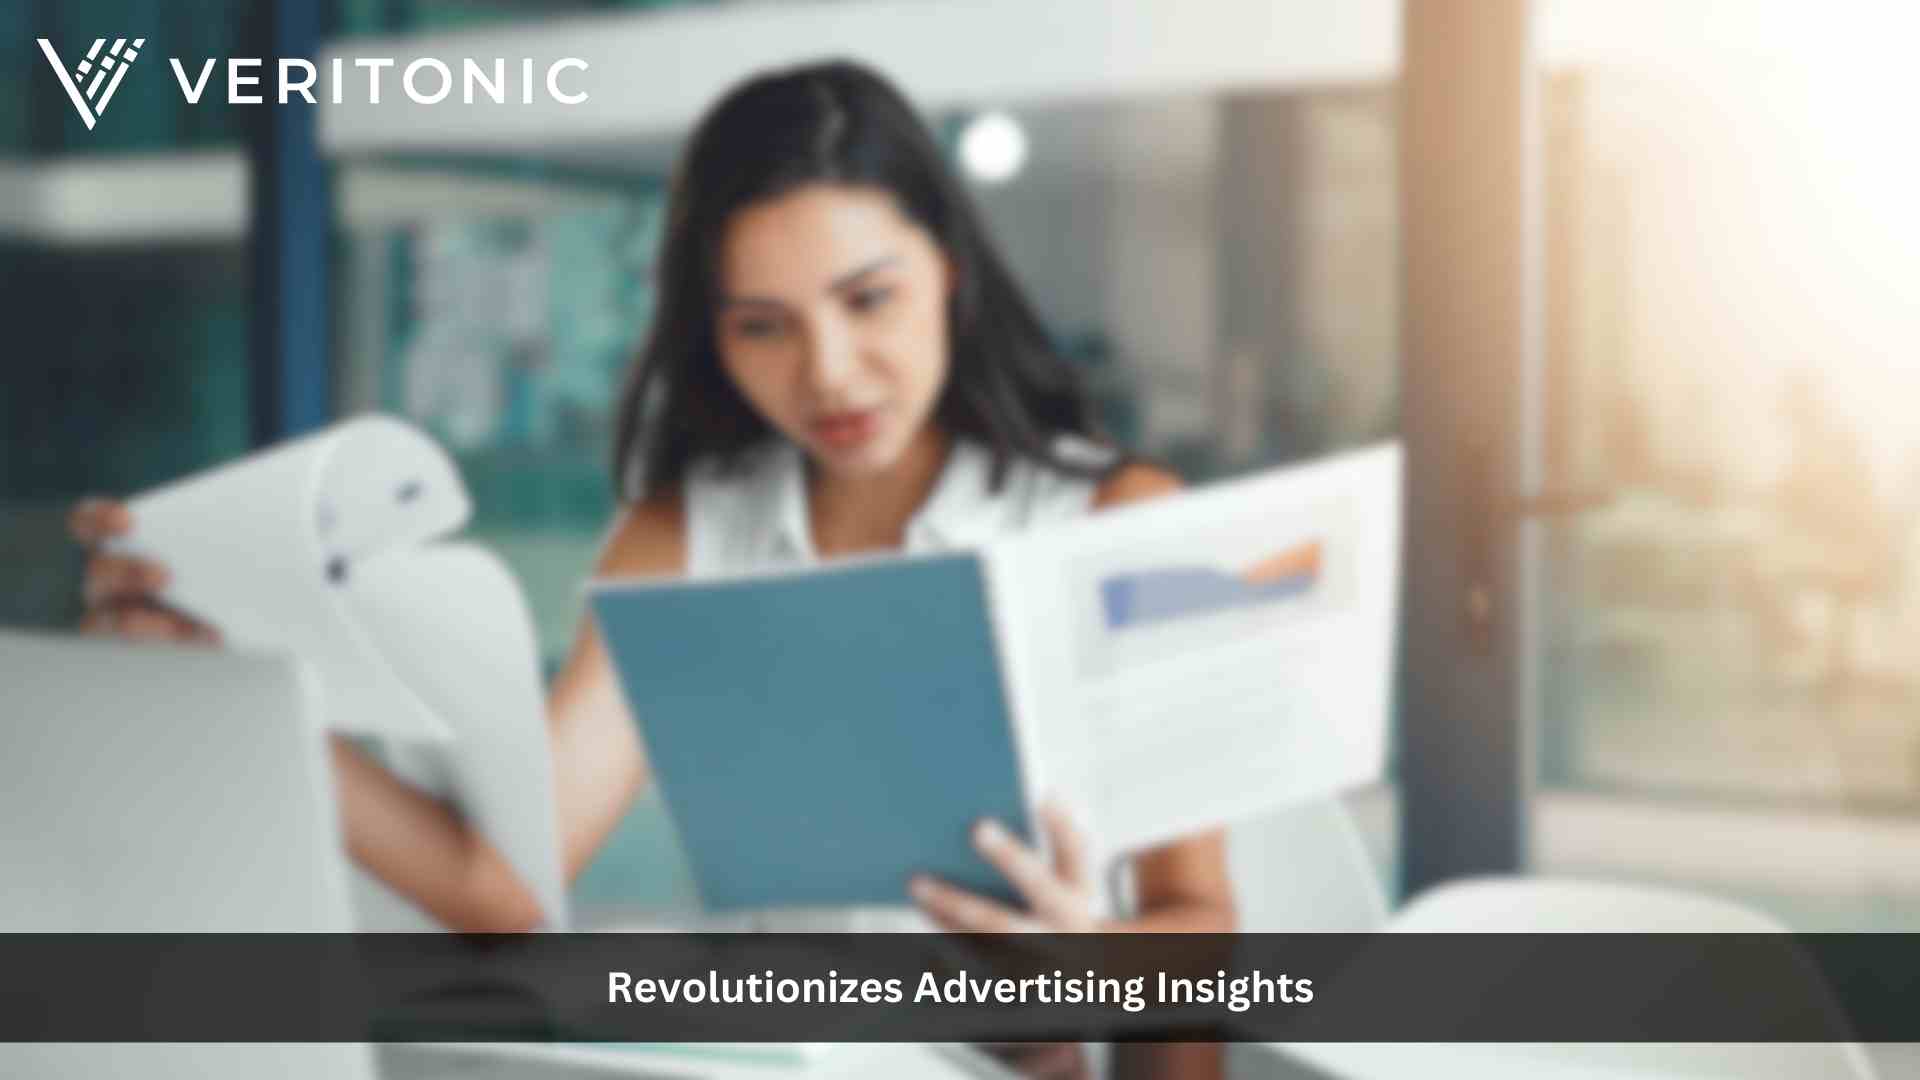 Veritonic Revolutionizes Advertising Insights with Brand Lift Measurement for Baked-In Audio Ads